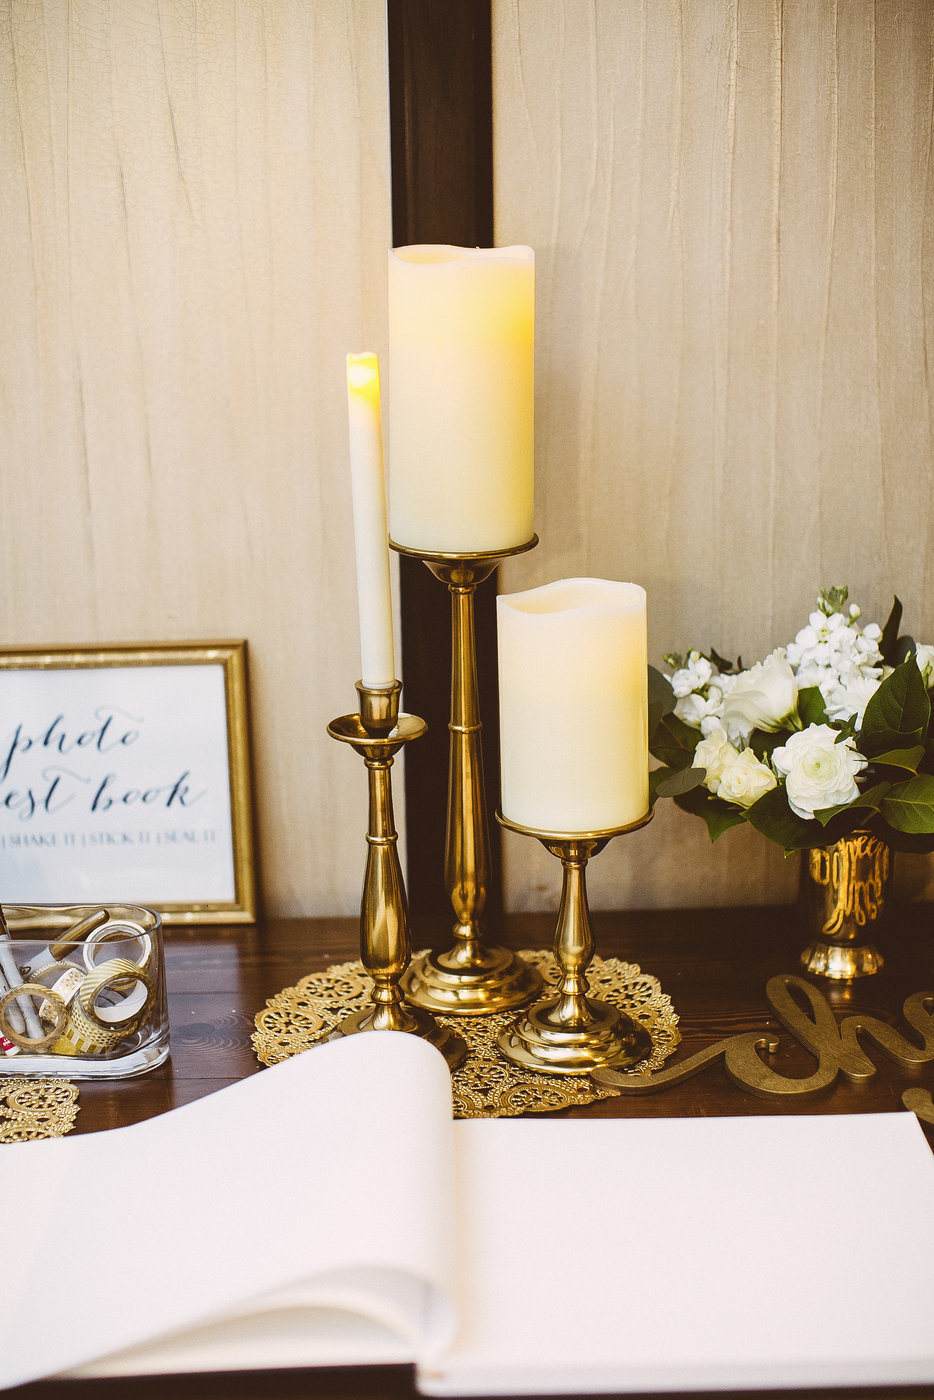 Welcome table details of vintage inspired brass candle holders and miniature monchromatic arrangements.